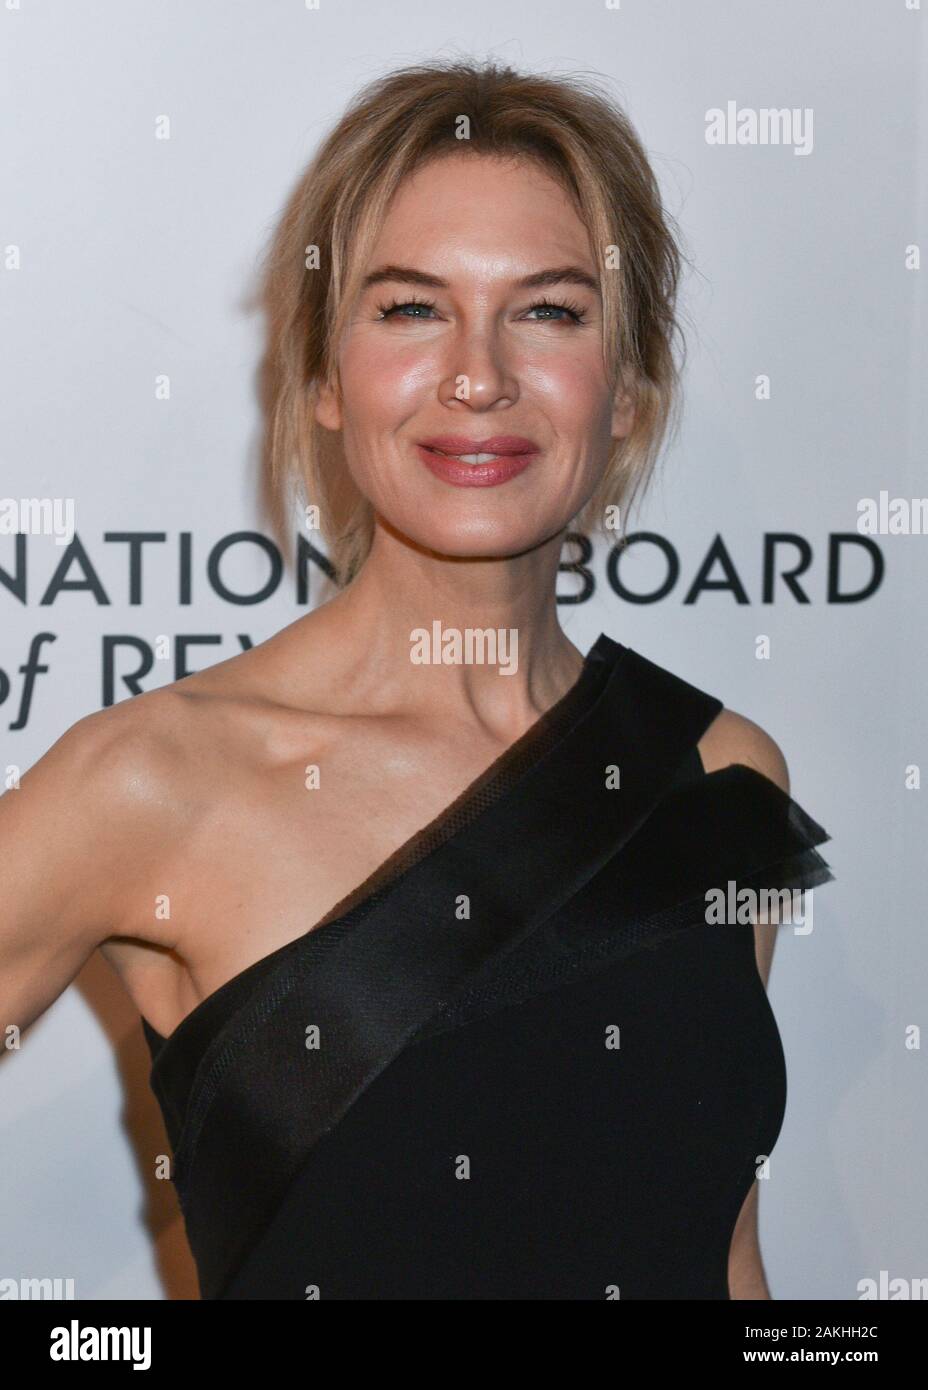 Renee Zellweger attends the 2020 National Board Of Review Gala on January 08, 2020 in New York City. Stock Photo